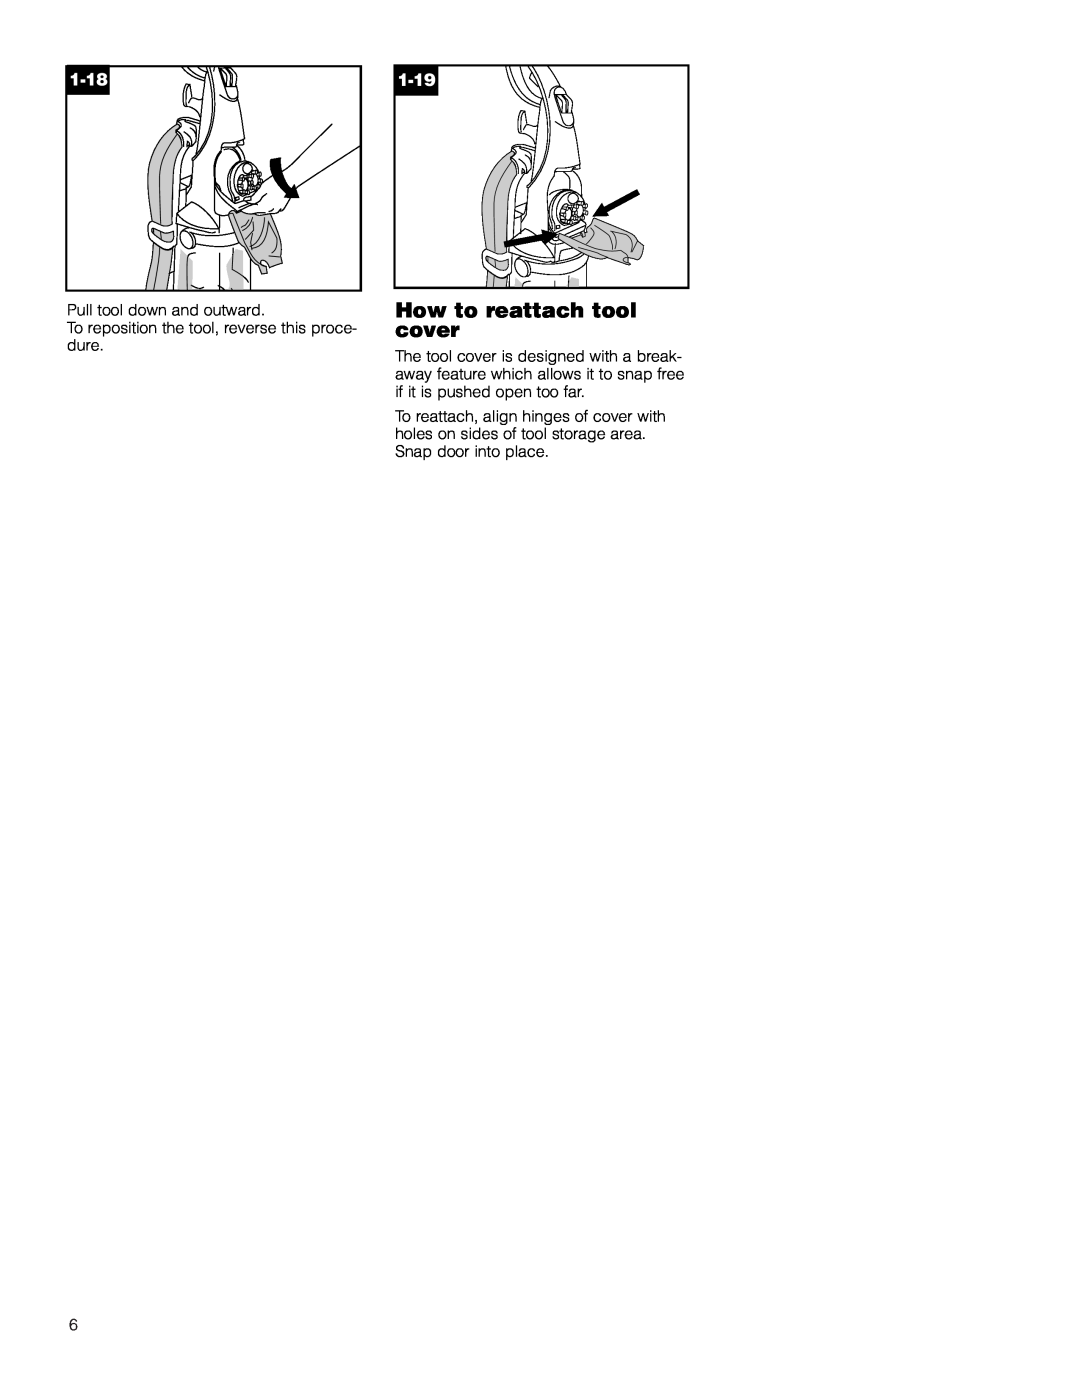 Hoover Deep Cleaner Steam Vacuum manual How to reattach tool cover, 1-18, 1-19, Pull tool down and outward 